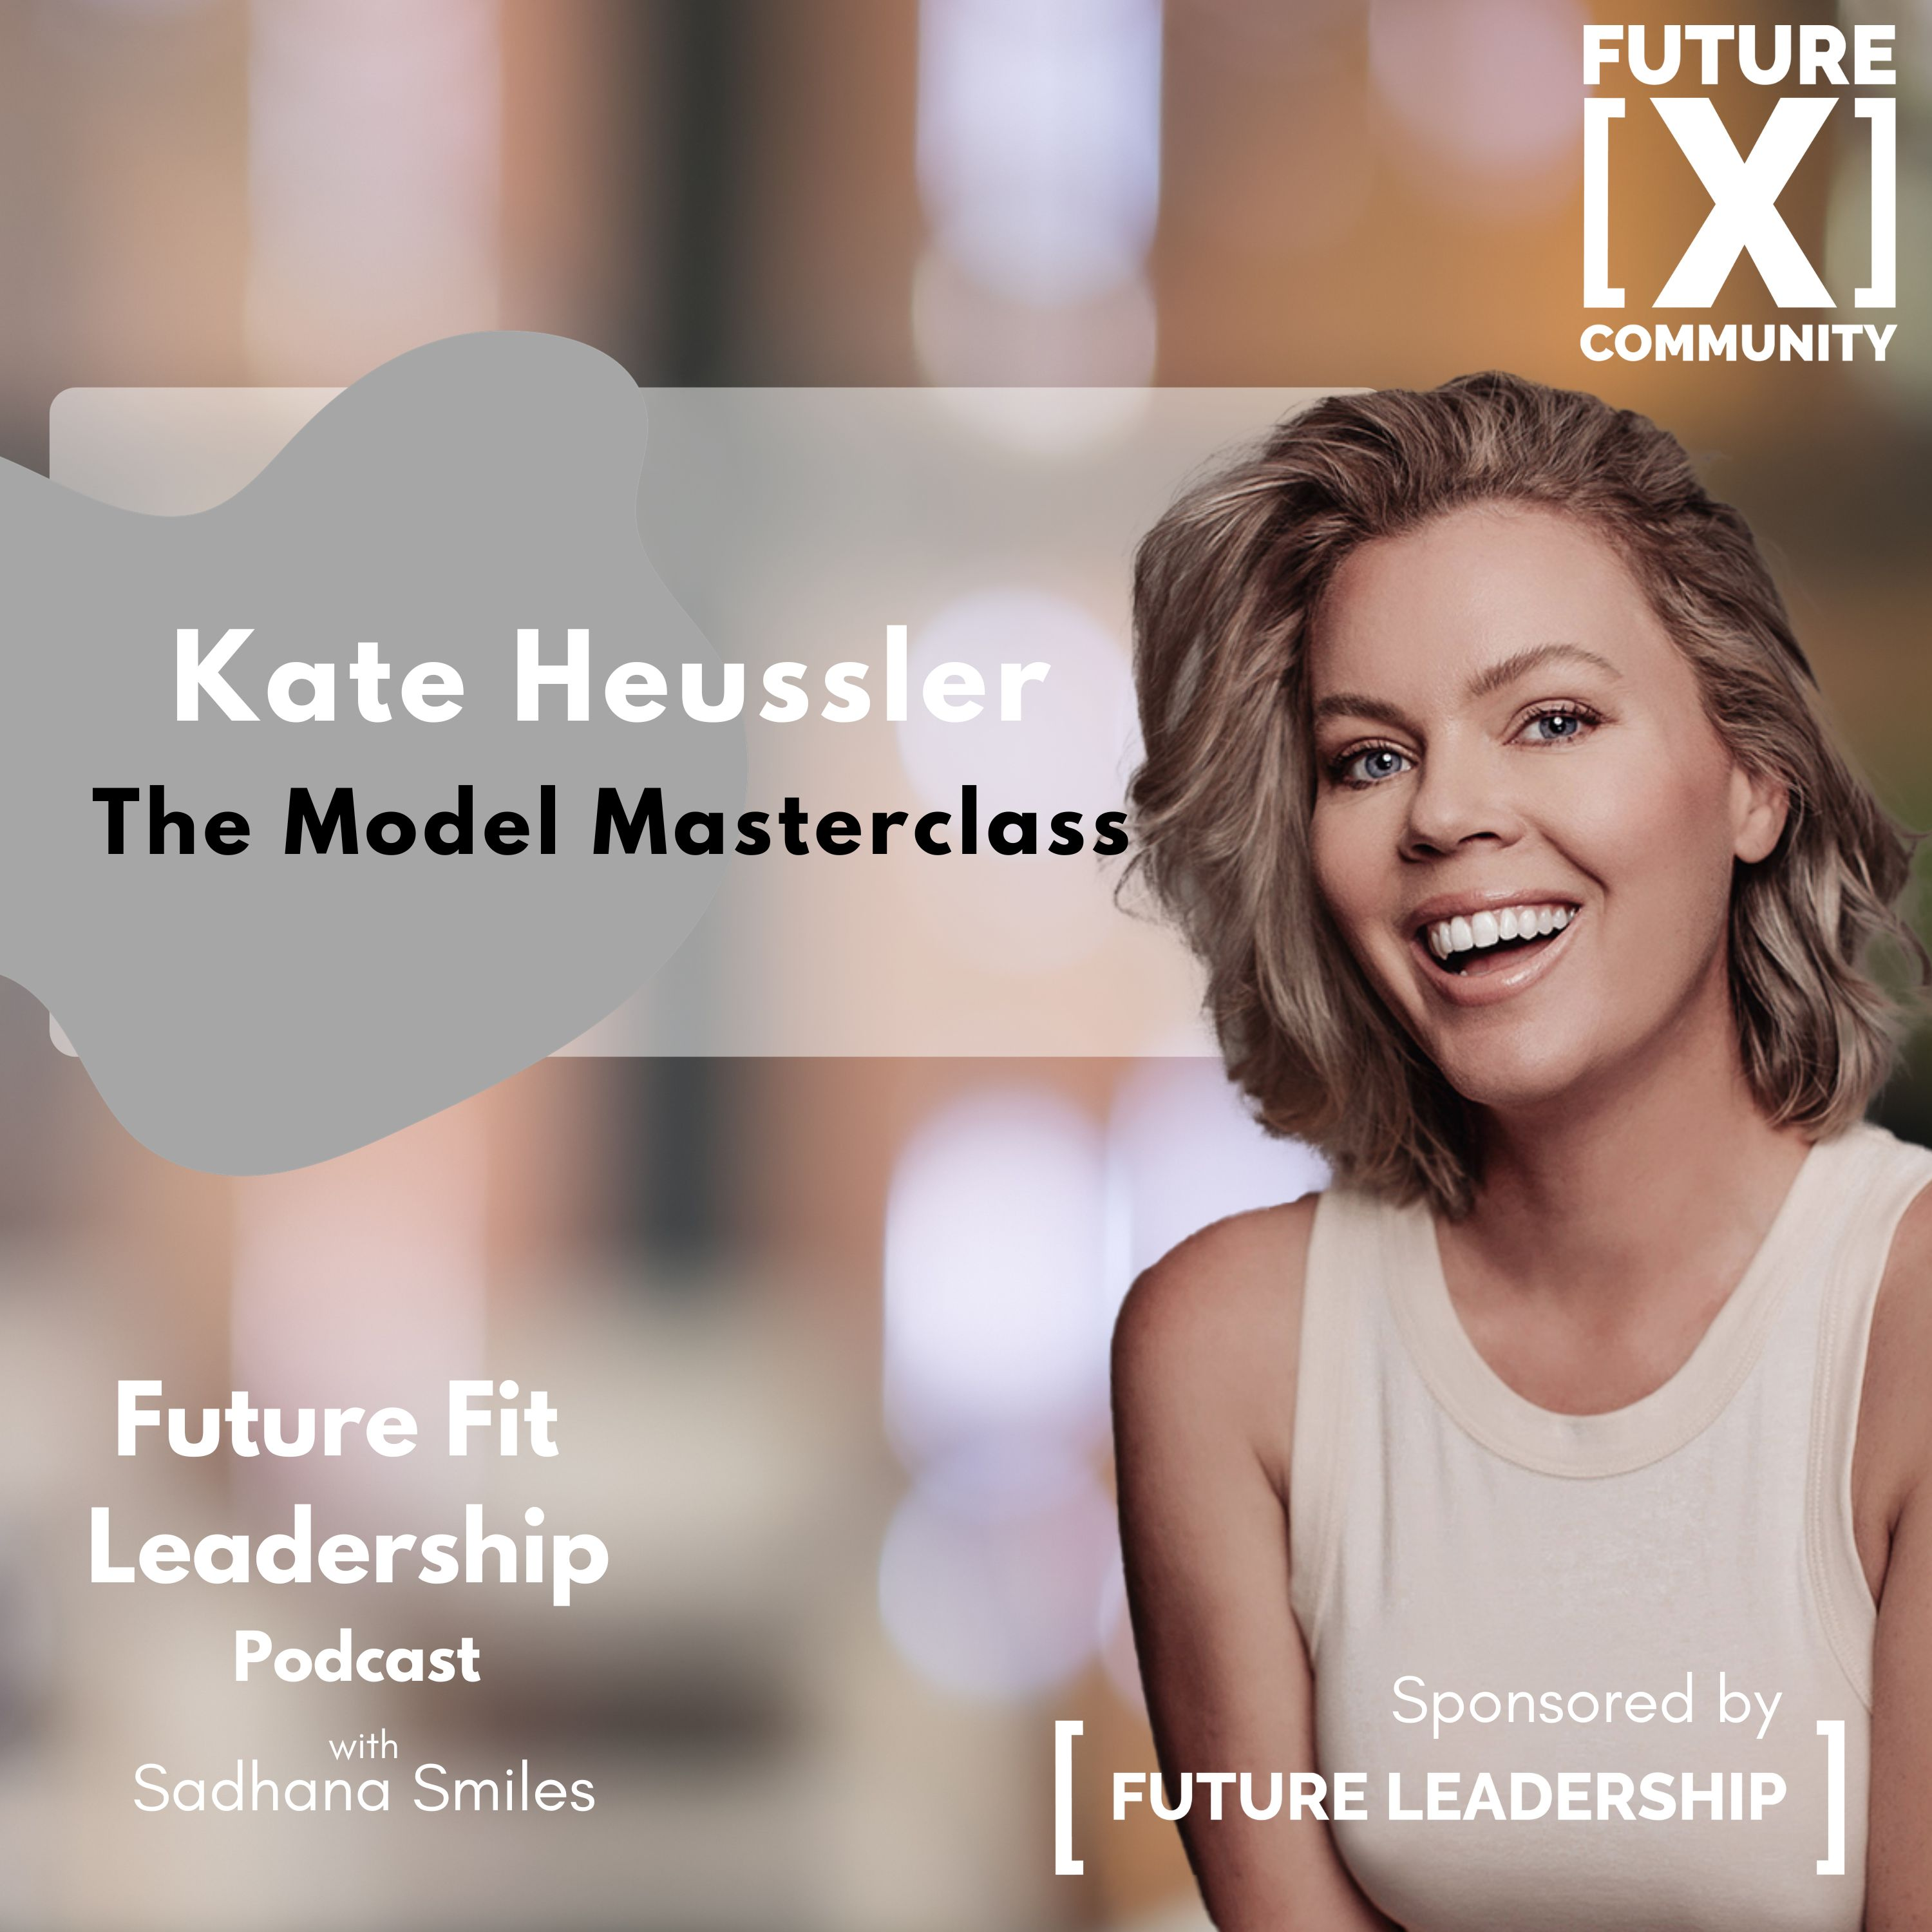 The Model Masterclass with Kate Heussler